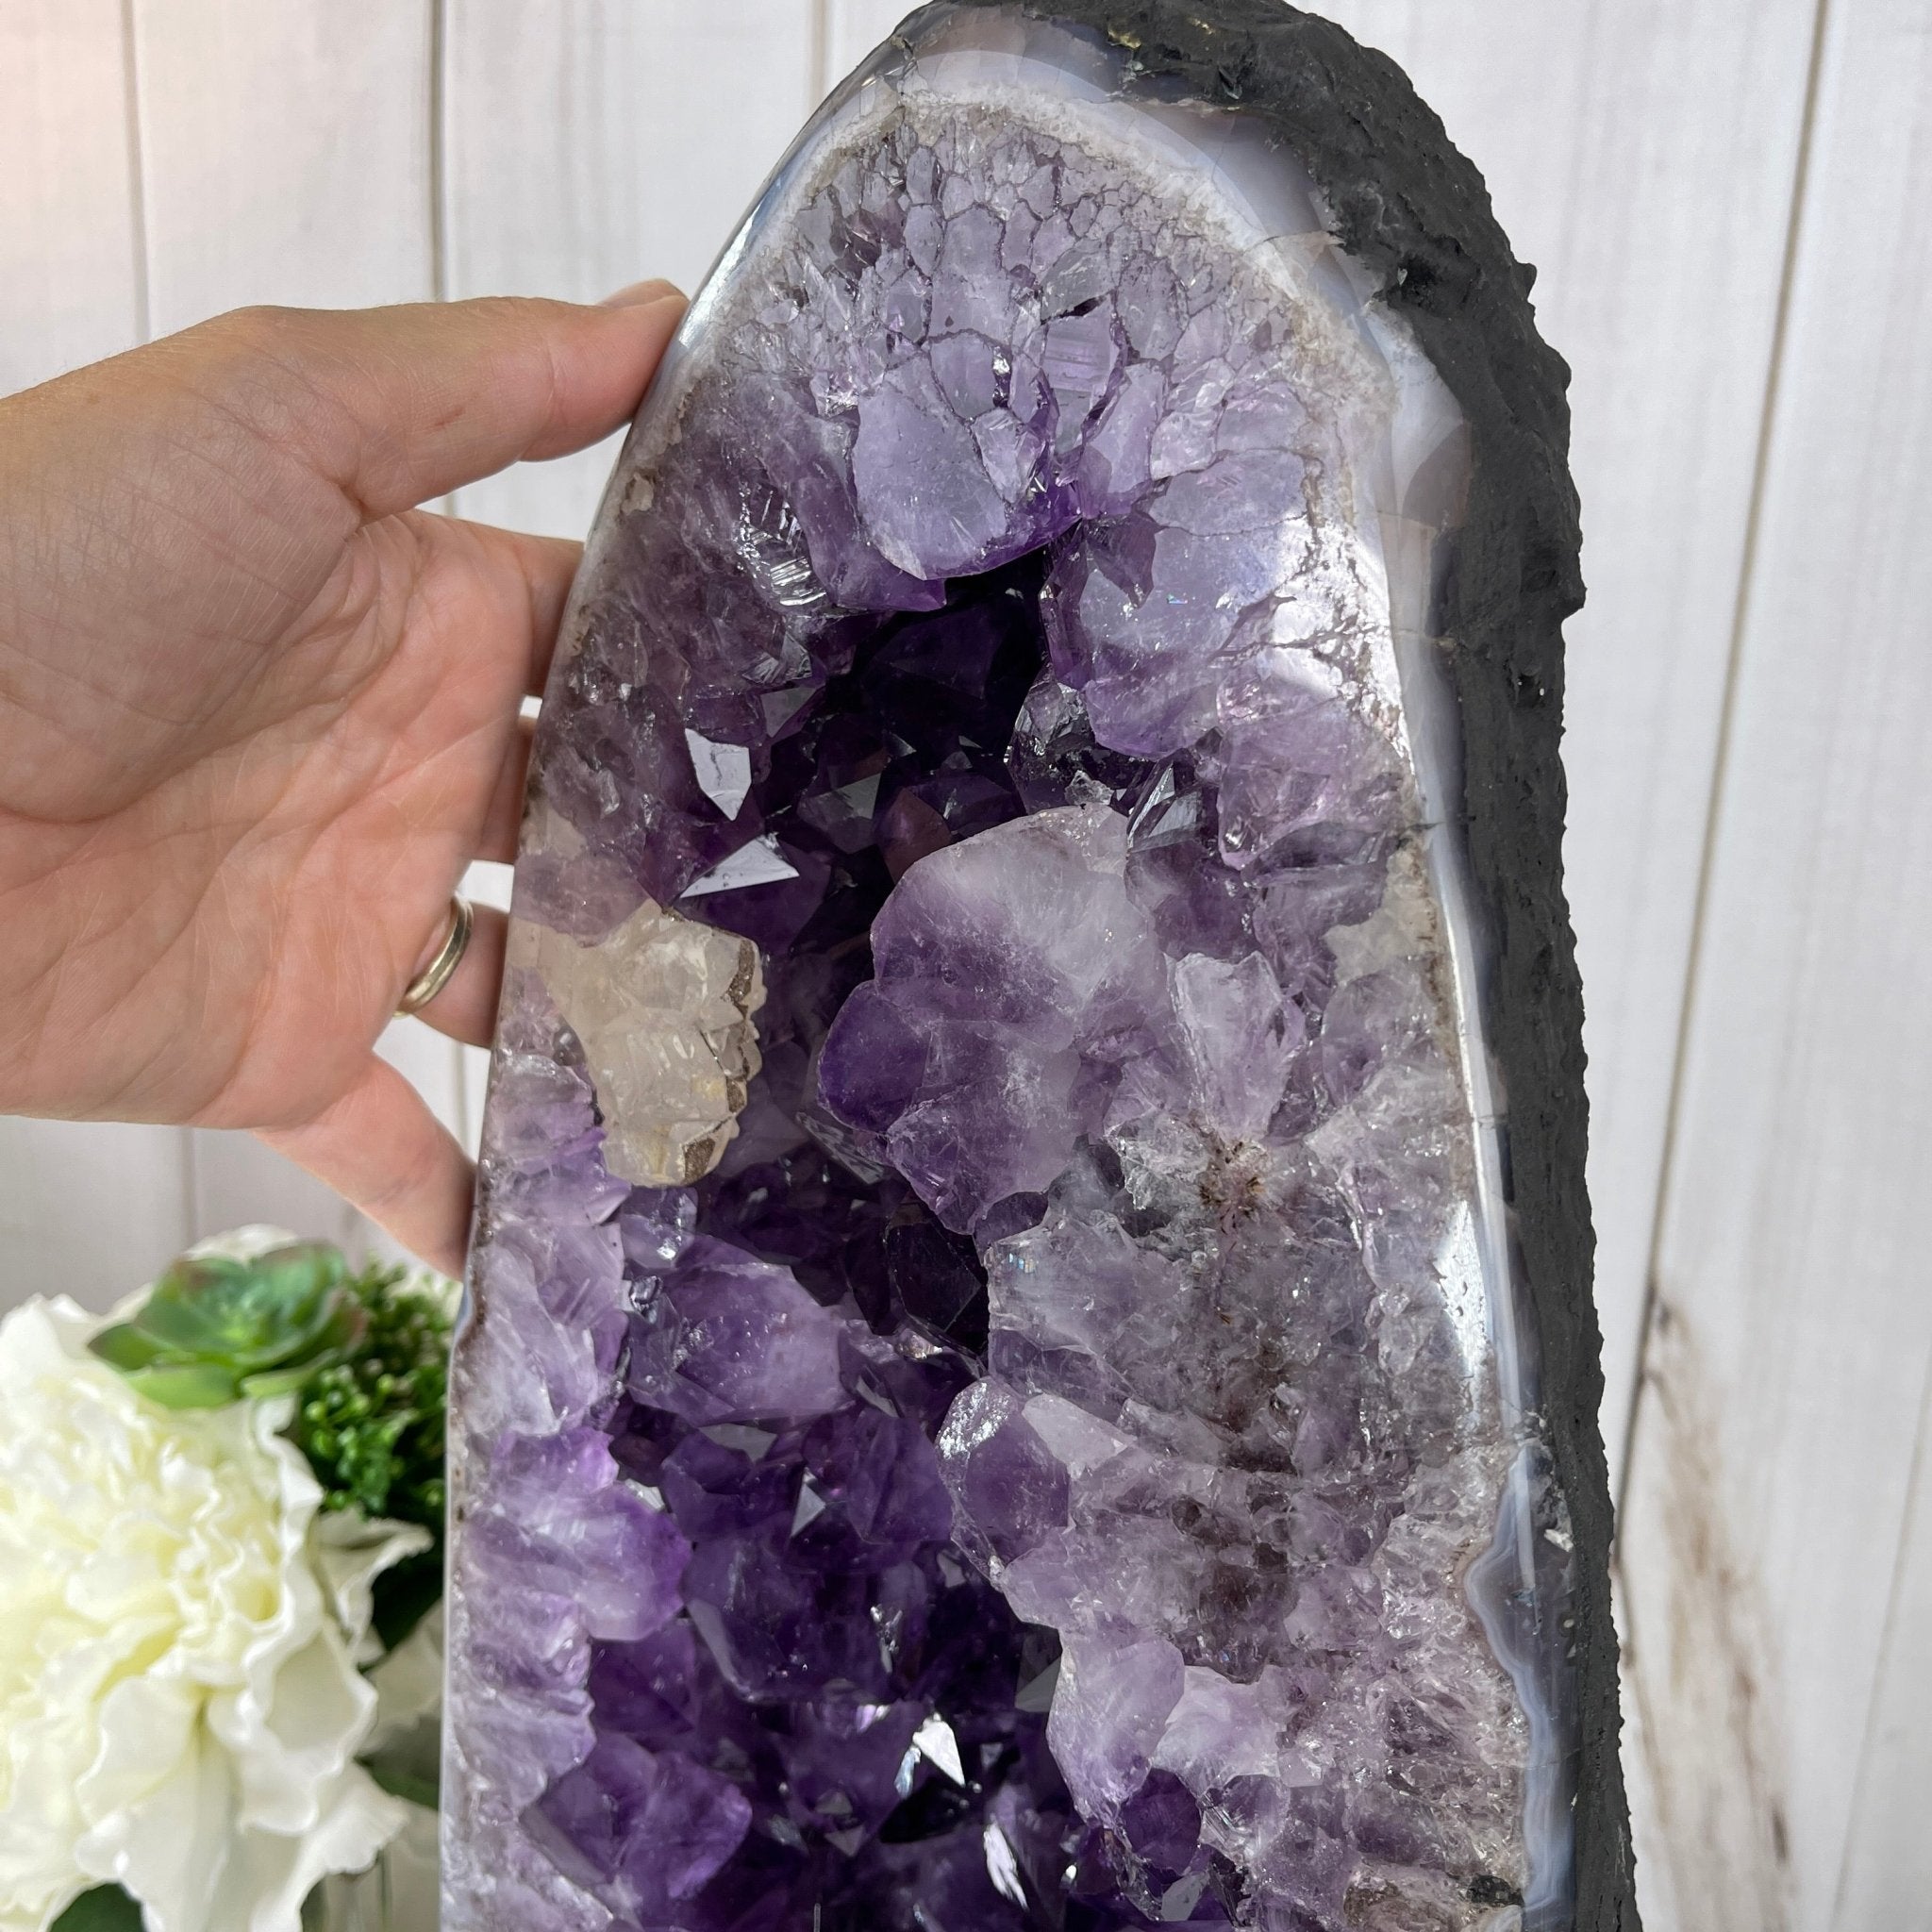 Extra Quality Brazilian Amethyst Cathedral, 17.25” tall & 35 lbs #5601-0489 by Brazil Gems - Brazil GemsBrazil GemsExtra Quality Brazilian Amethyst Cathedral, 17.25” tall & 35 lbs #5601-0489 by Brazil GemsCathedrals5601-0489